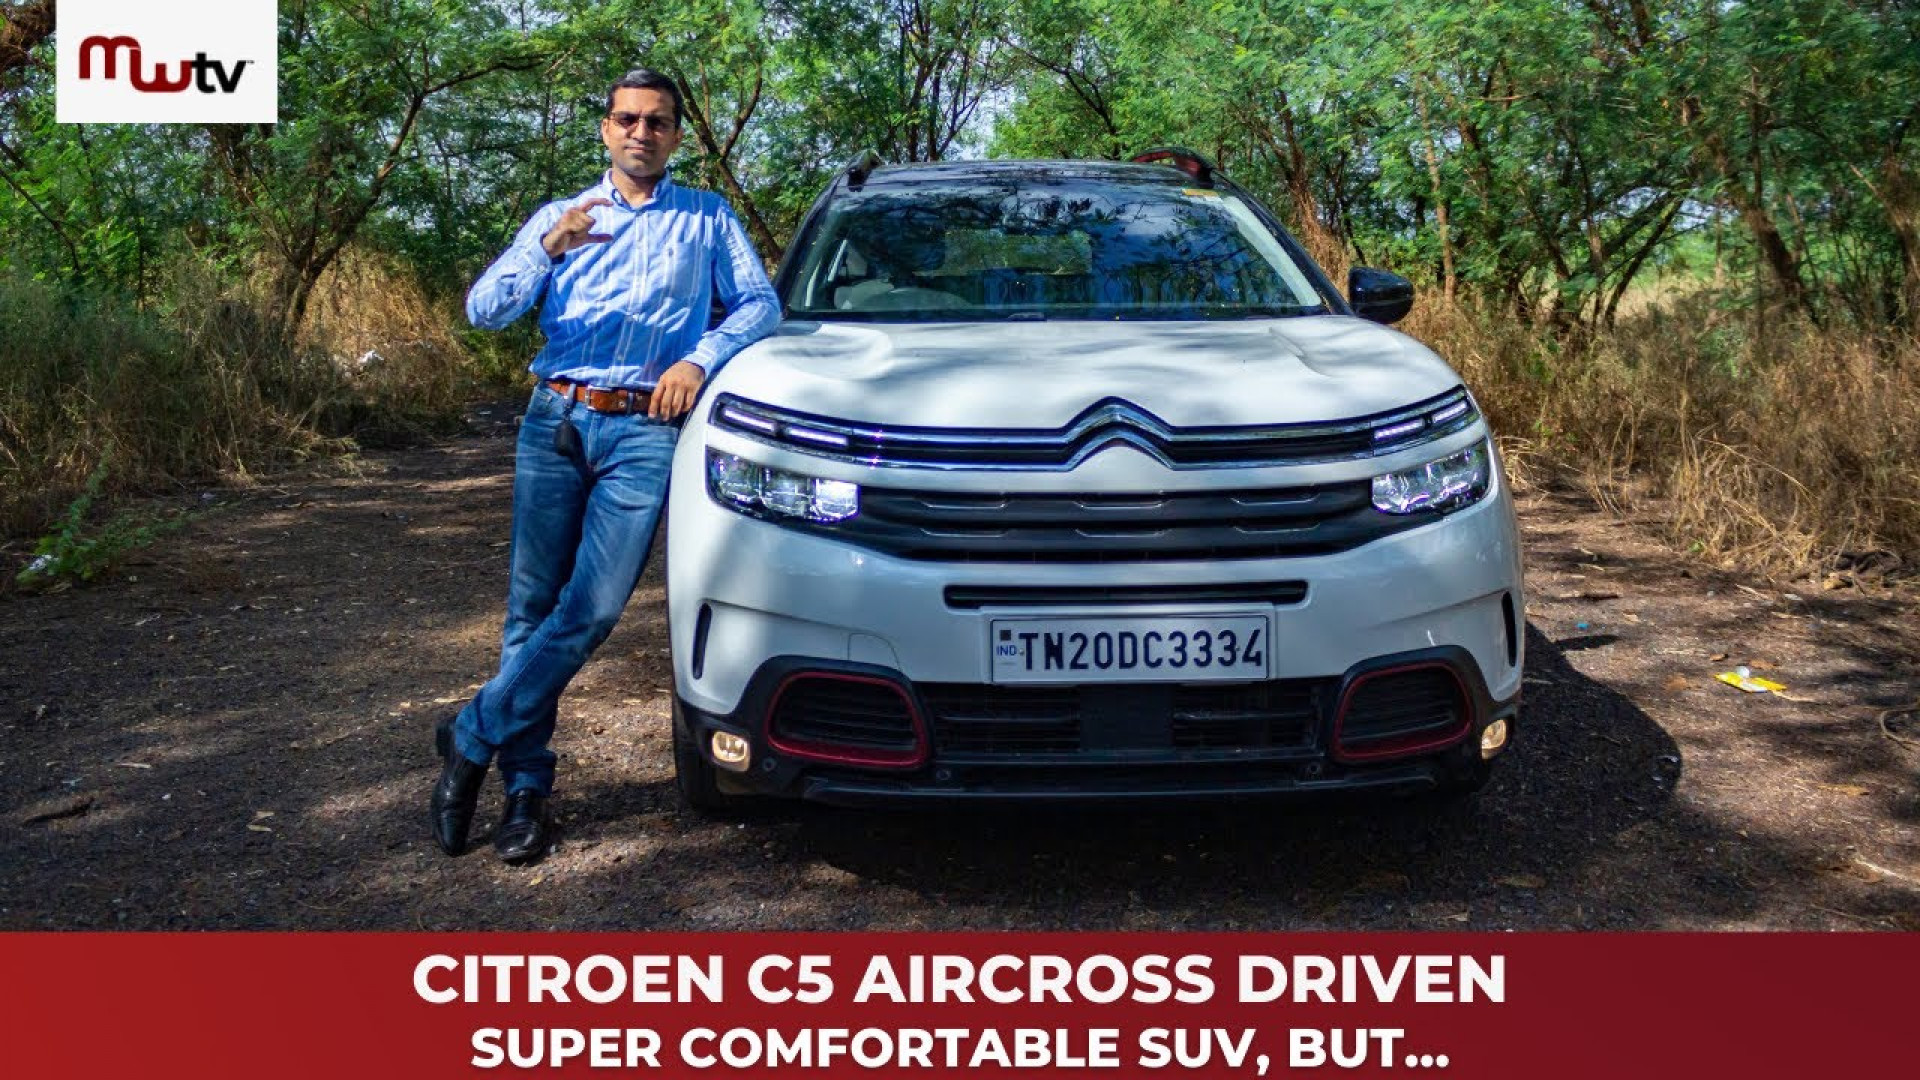 2021 Citroen C5 Aircross in-depth review - the most comfortable